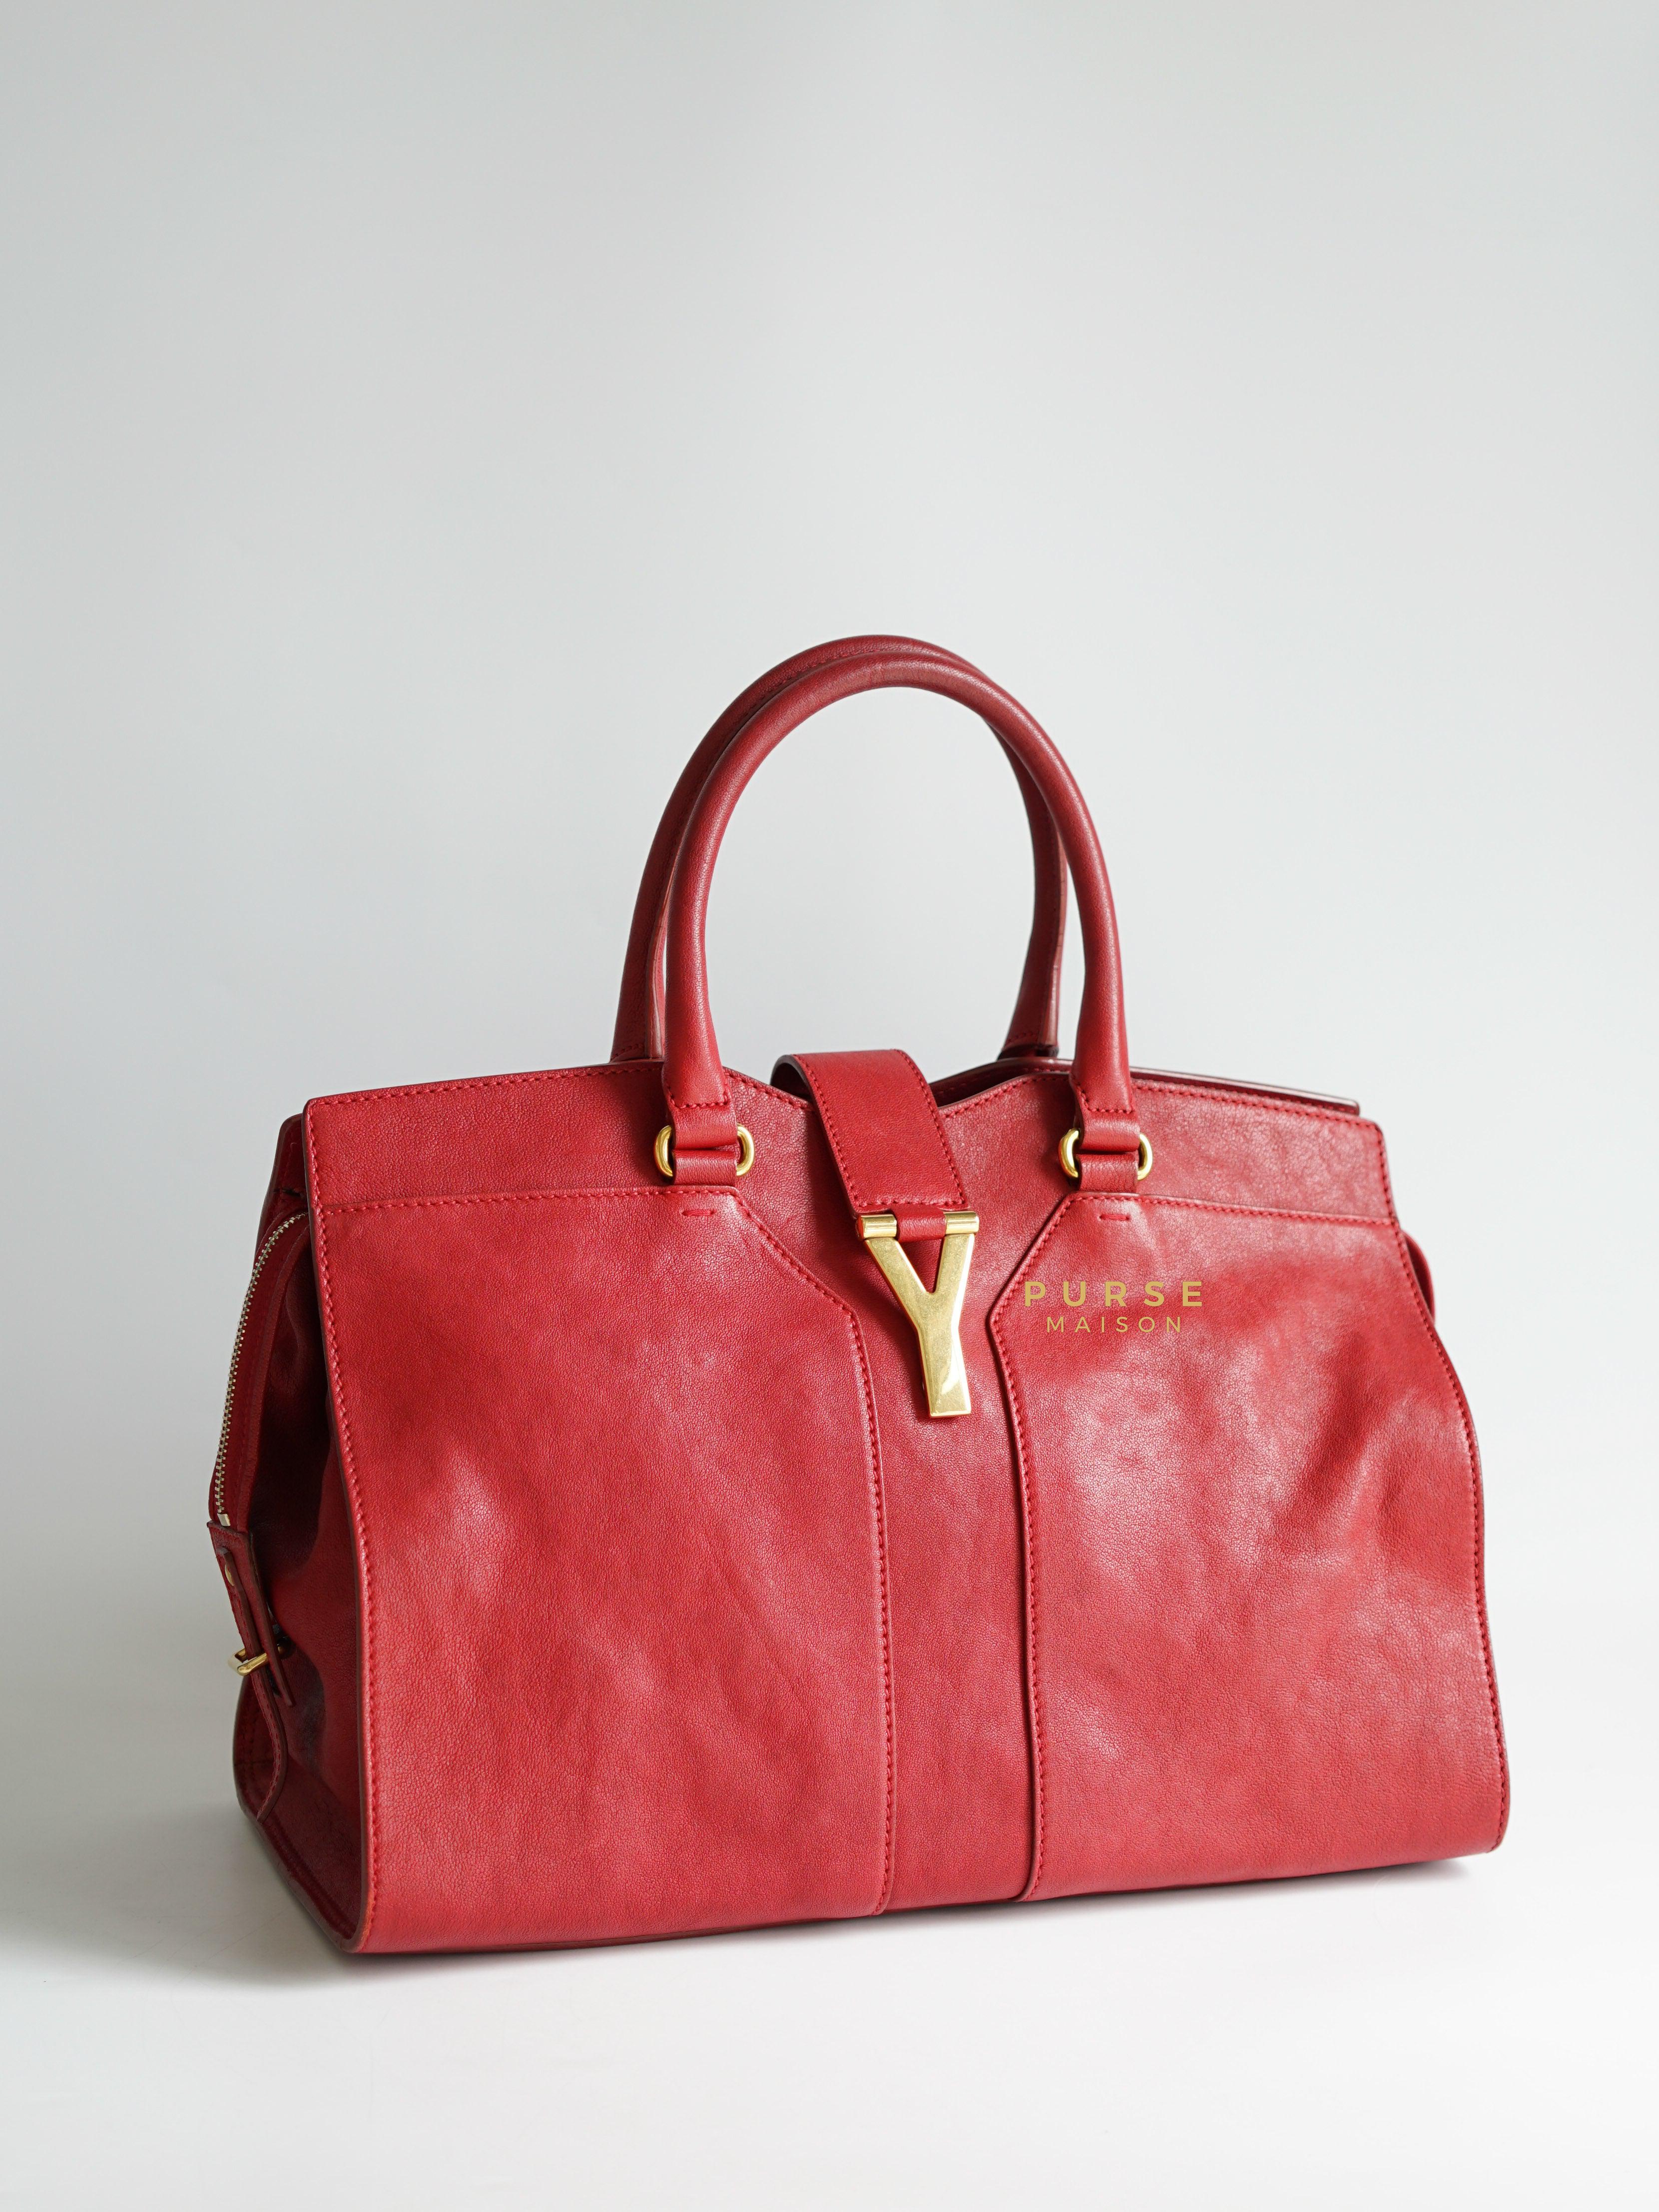 YSL Cabas Chyc Medium in Gold Hardware (Red) | Purse Maison Luxury Bags Shop